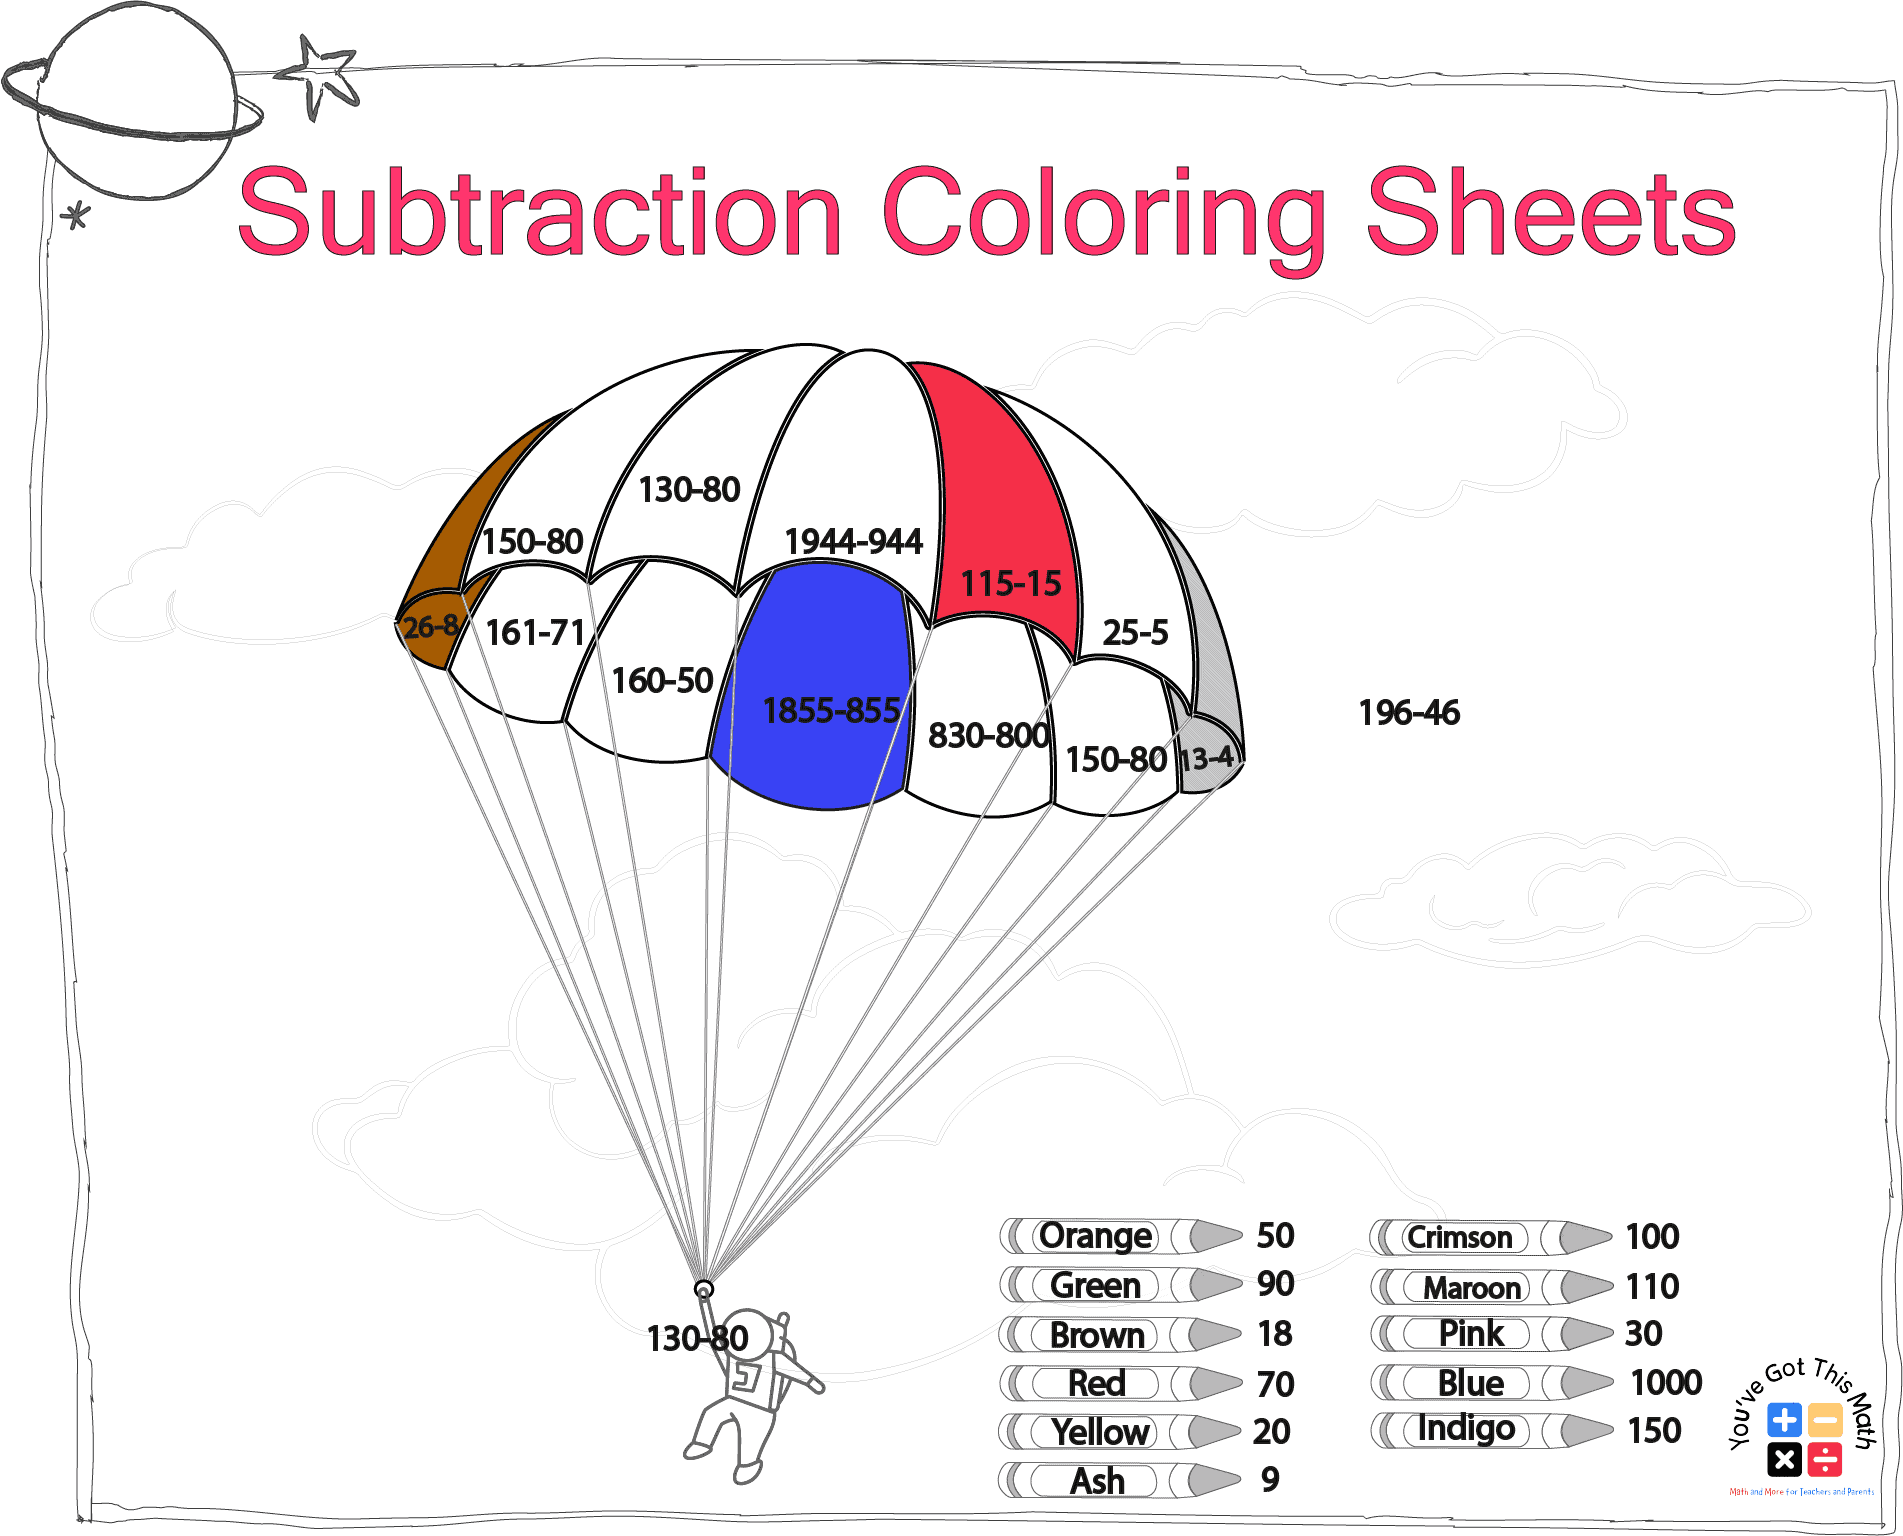 Long digit subtraction in subtraction coloring sheets